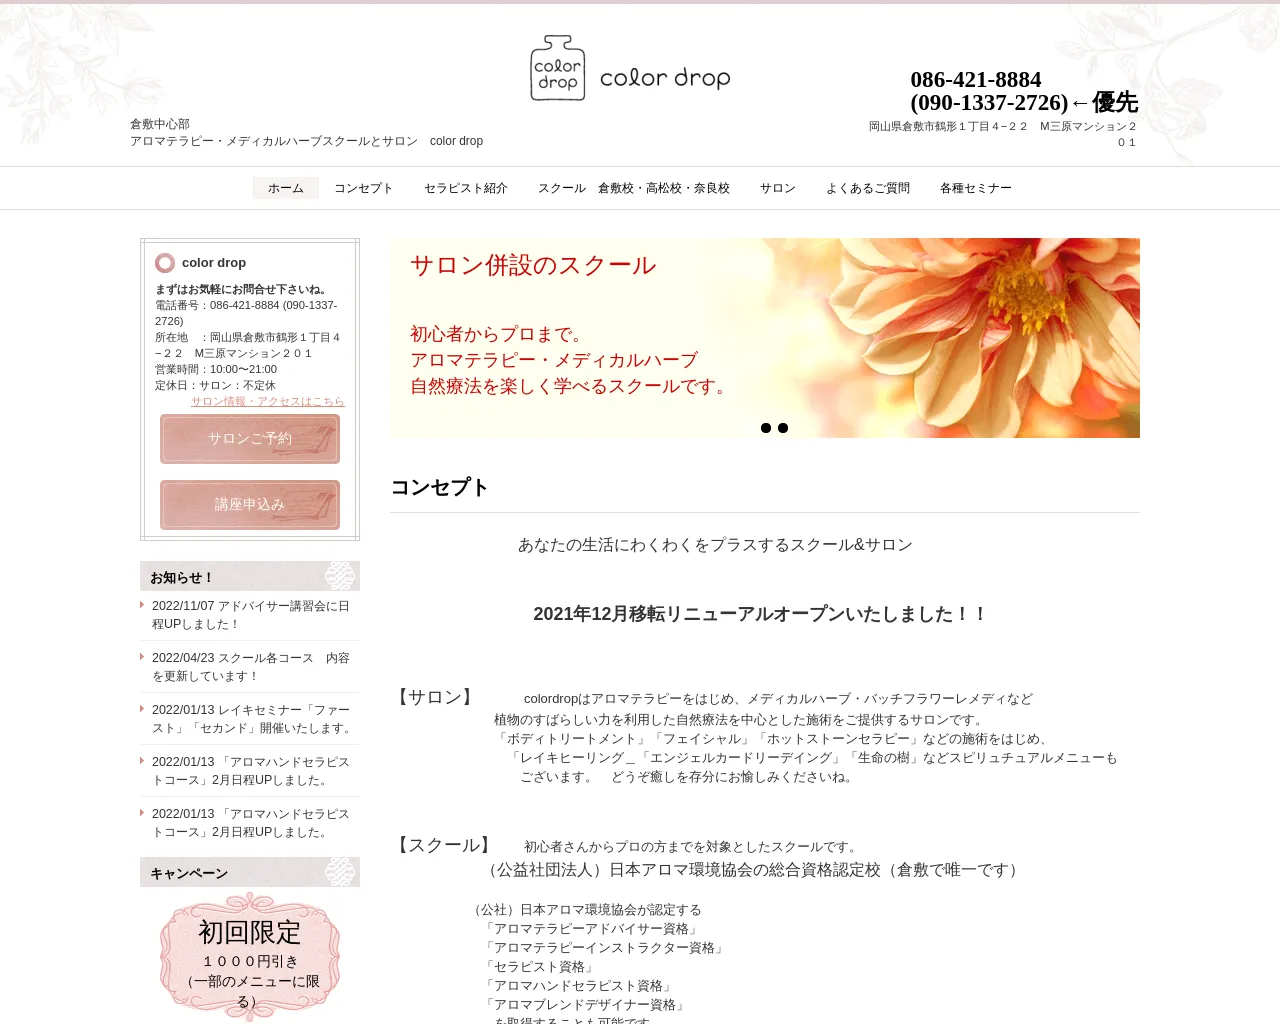 colordrop site